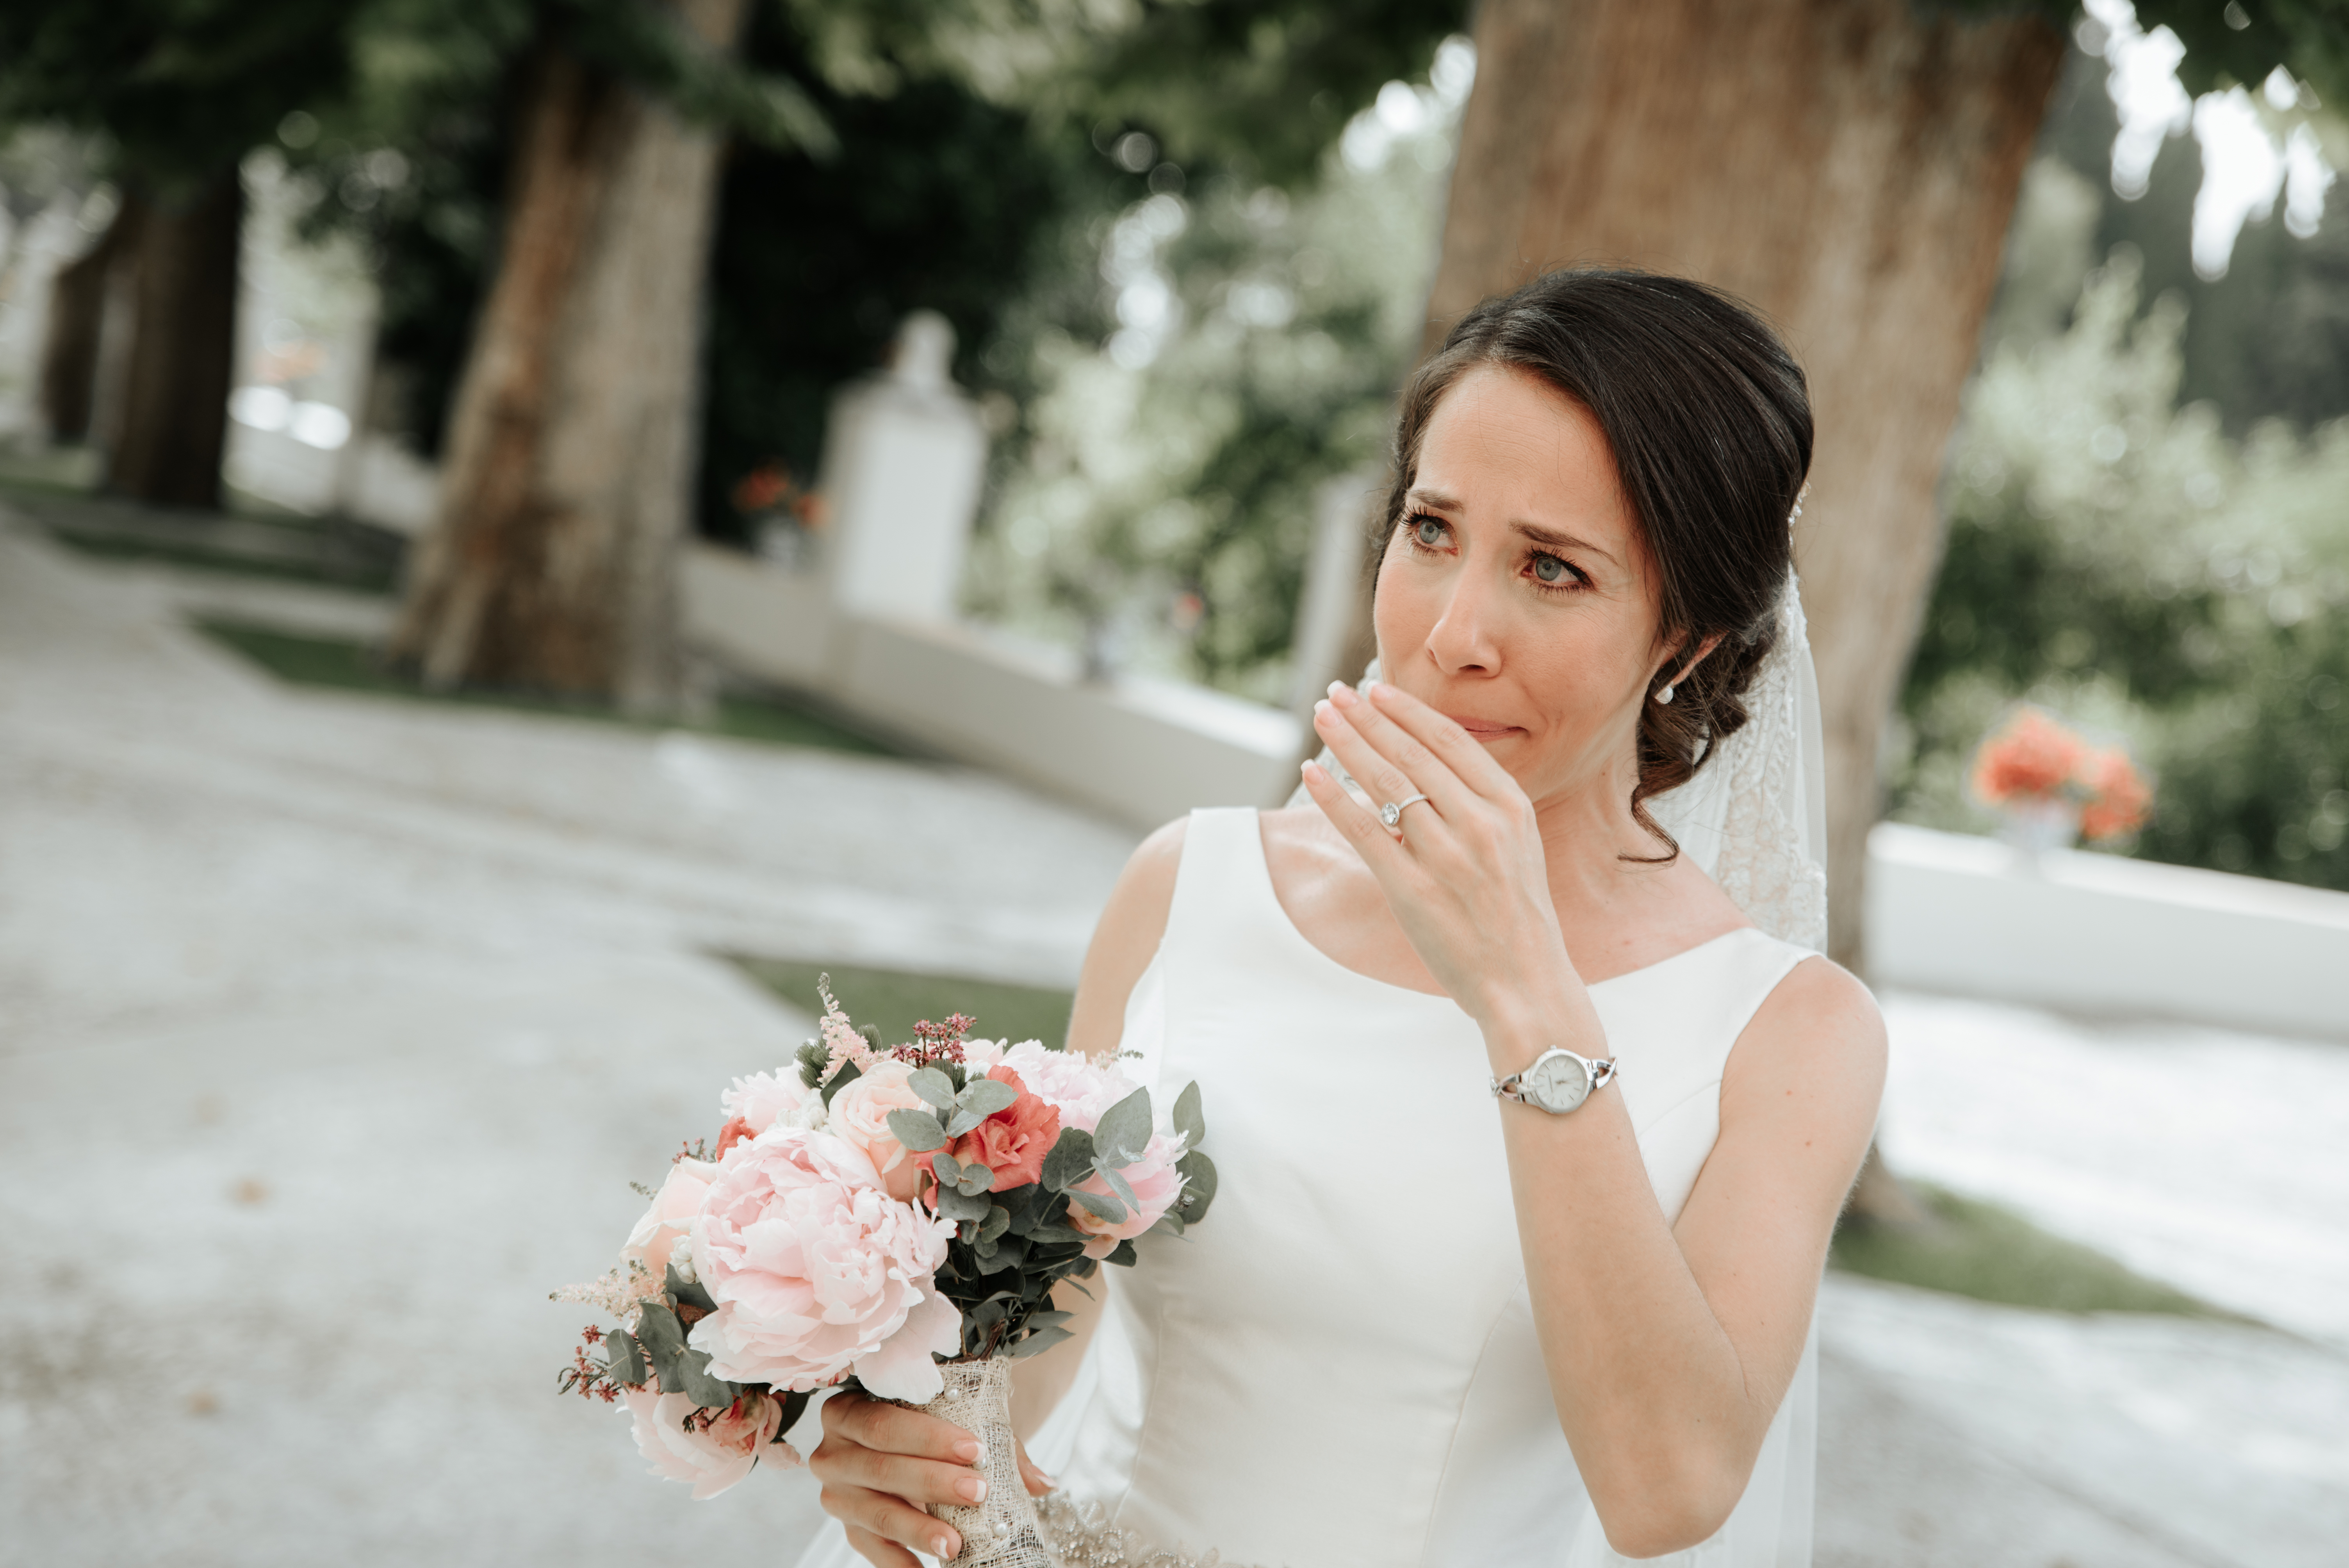 A bride is on the verge of tears | Source: Shutterstock